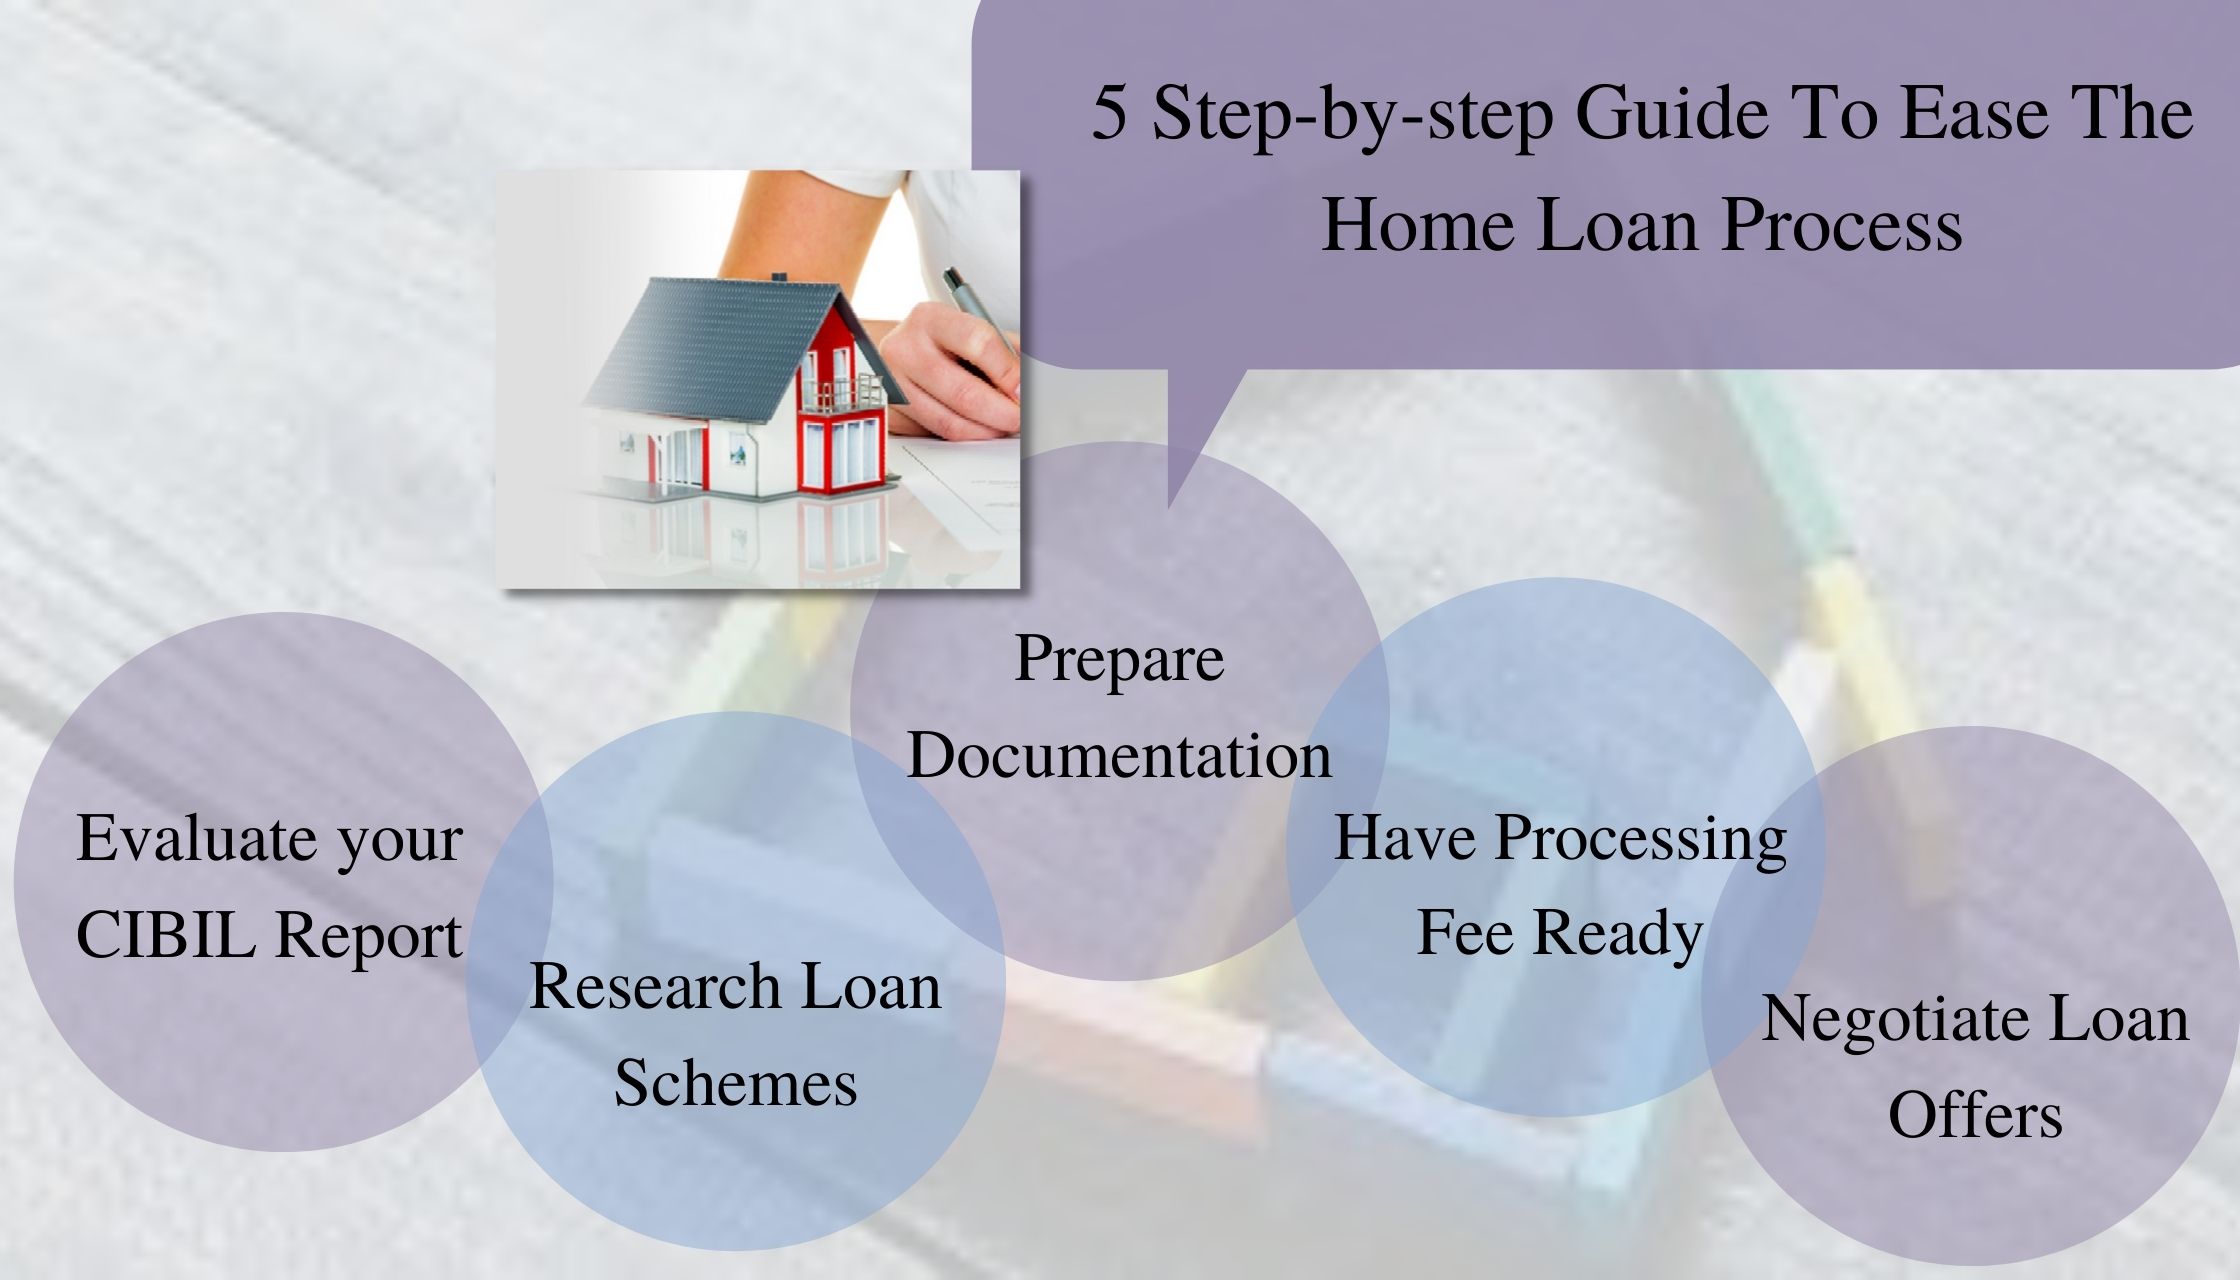 5 Step-by-step Guide To Ease The Home Loan Process